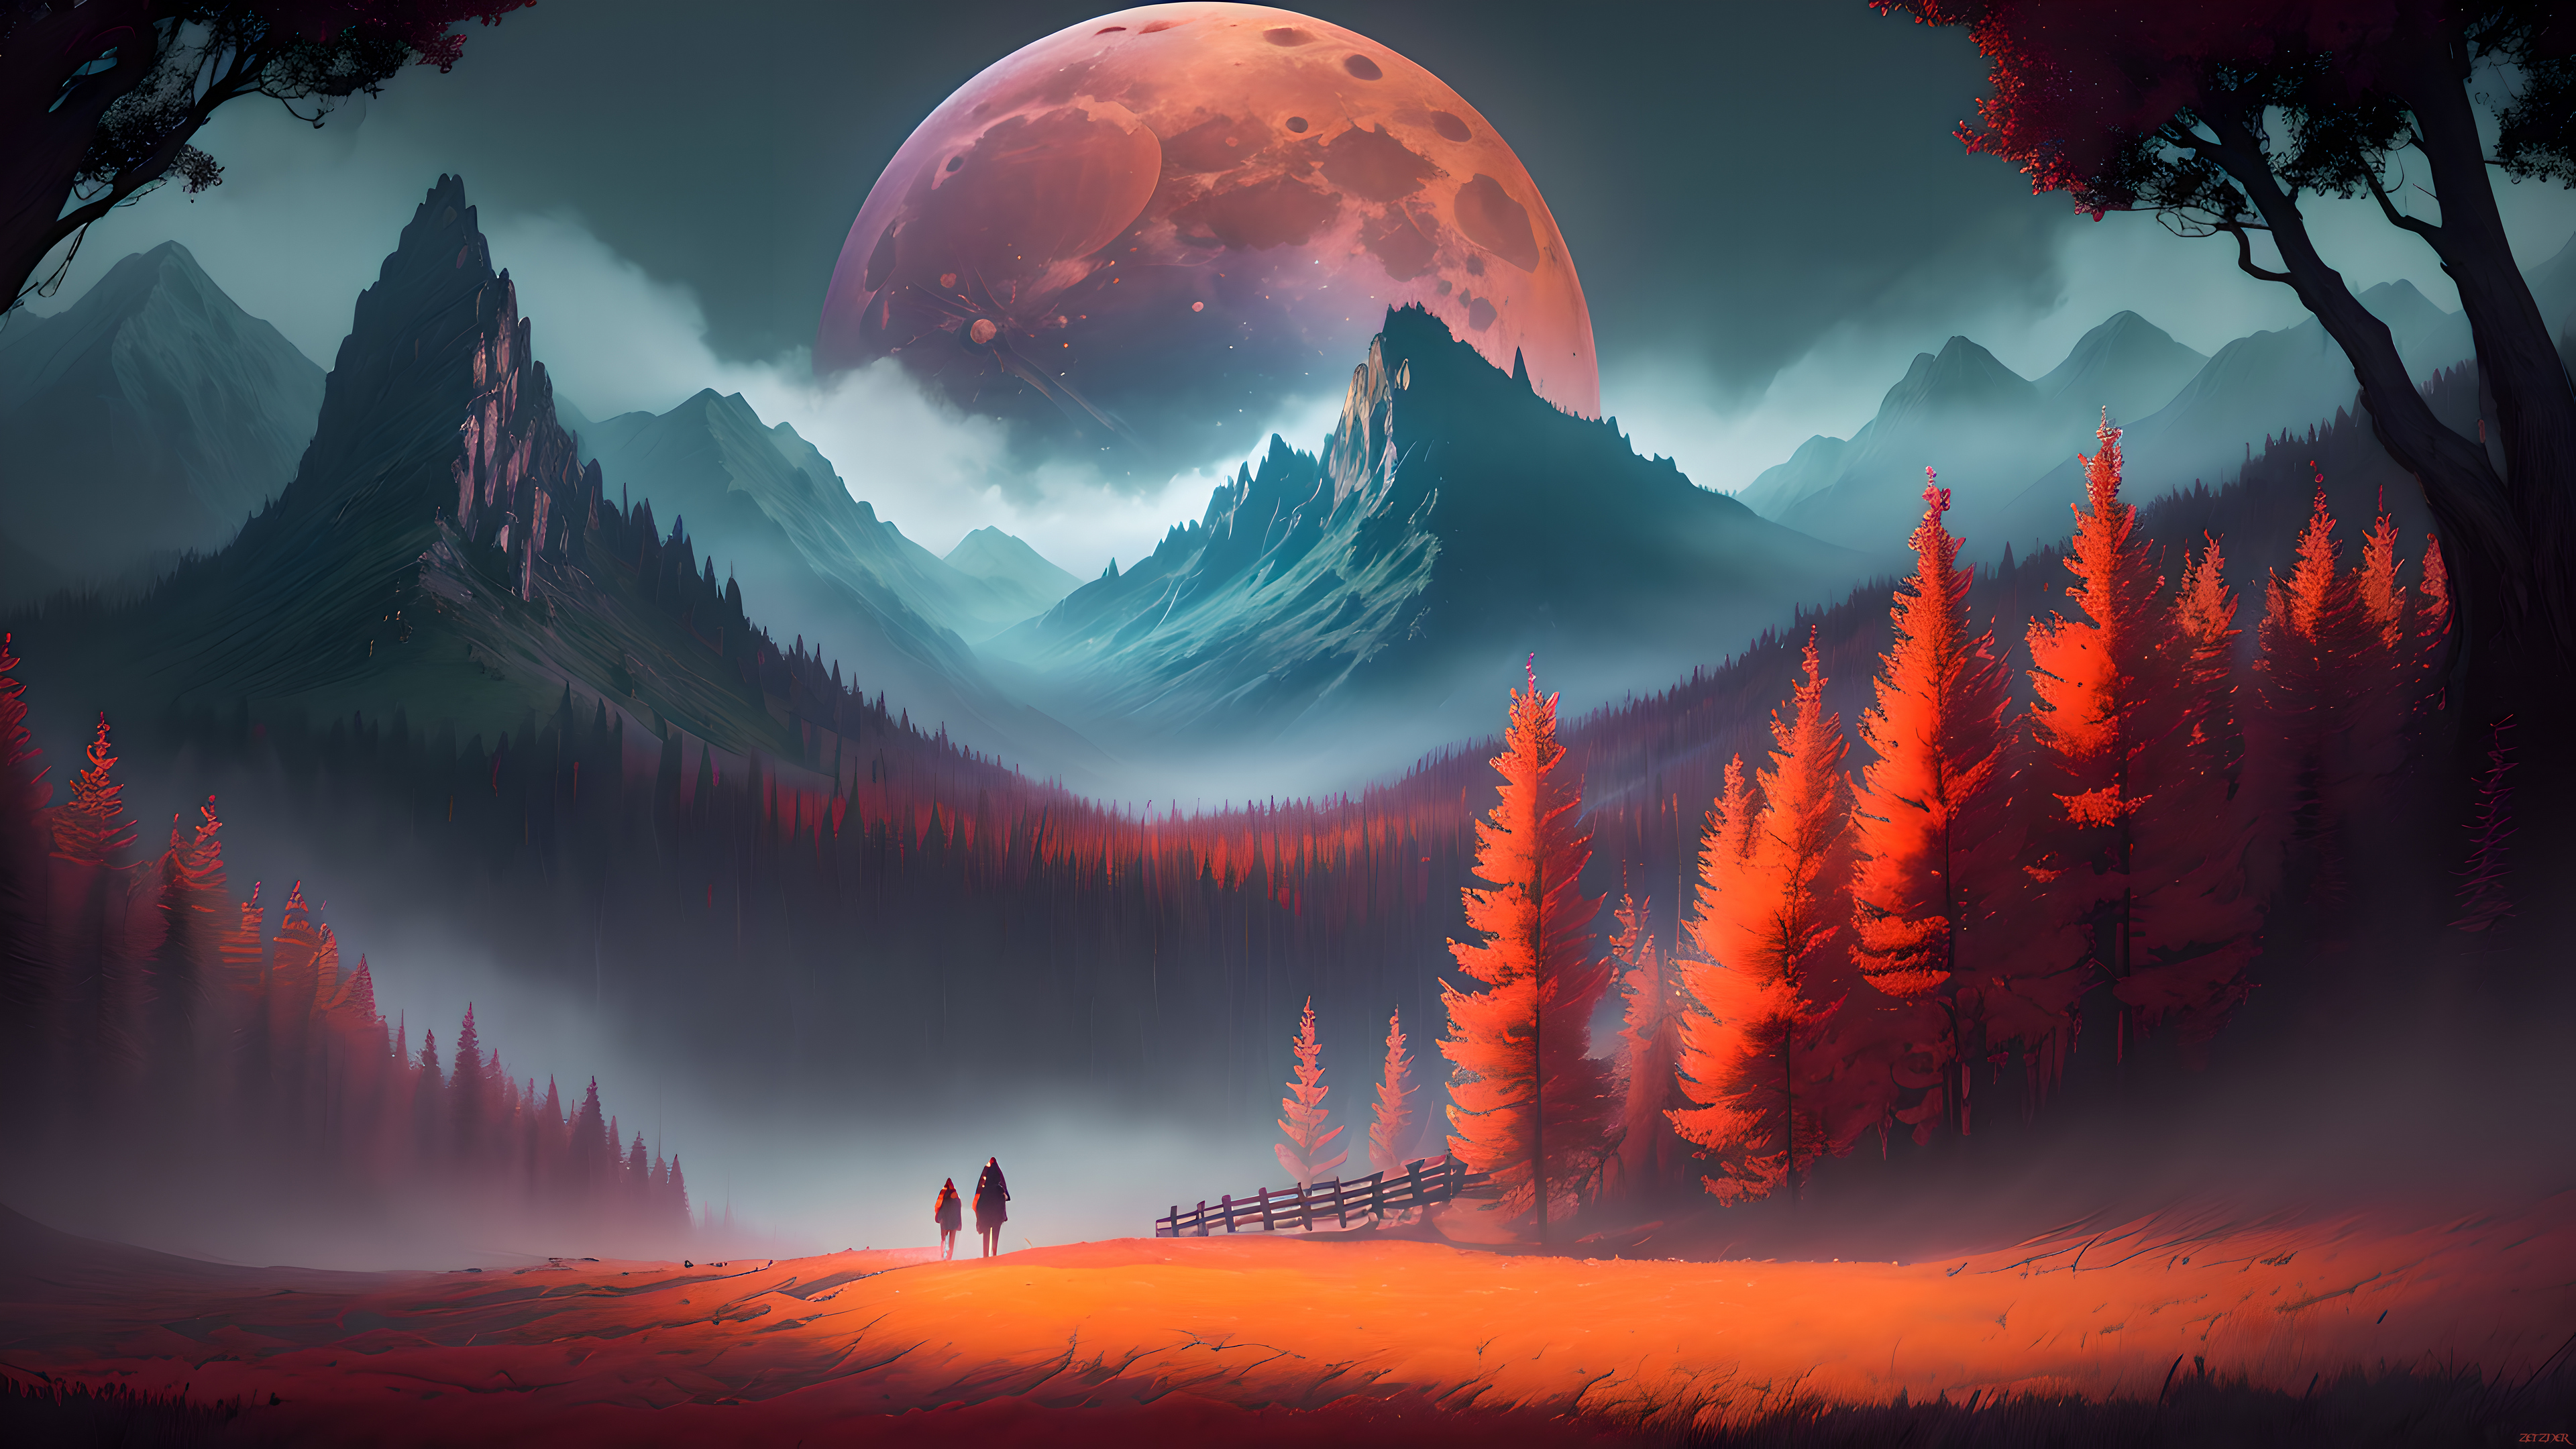 Fantasy landscape with people walking in the mountains against the backdrop of a huge moon